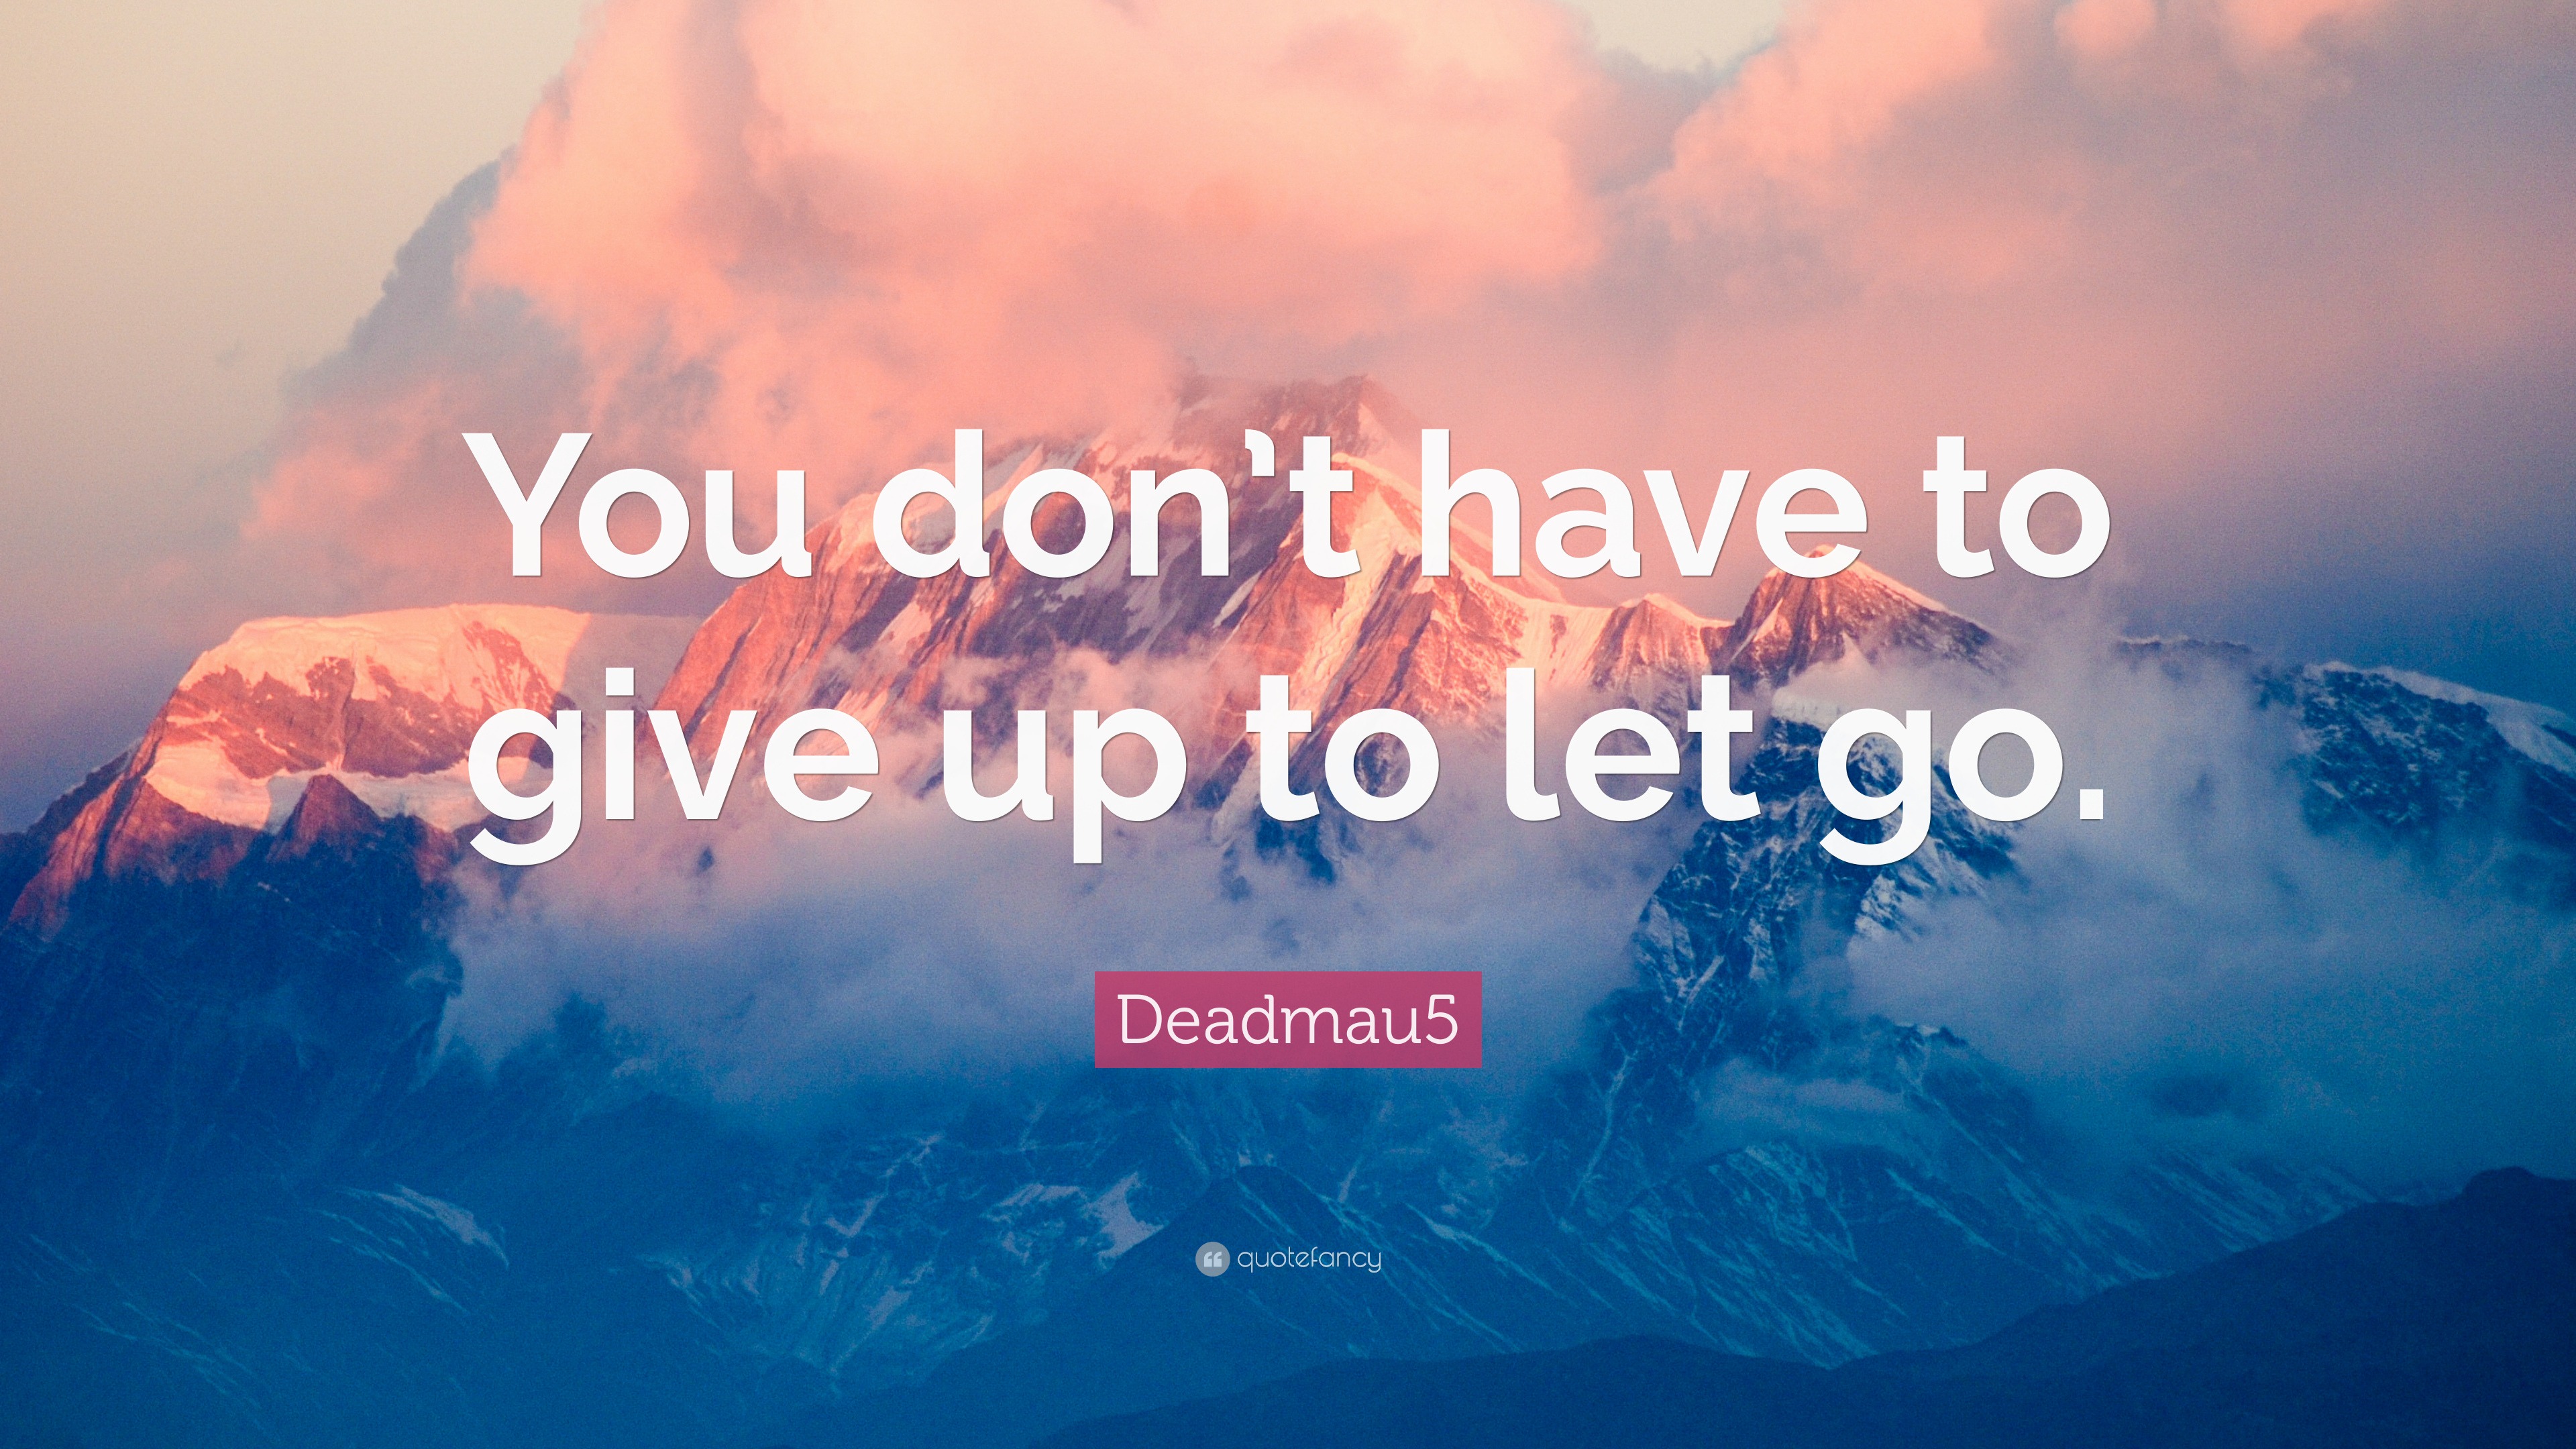 Deadmau5 Quote: “You don’t have to give up to let go.”